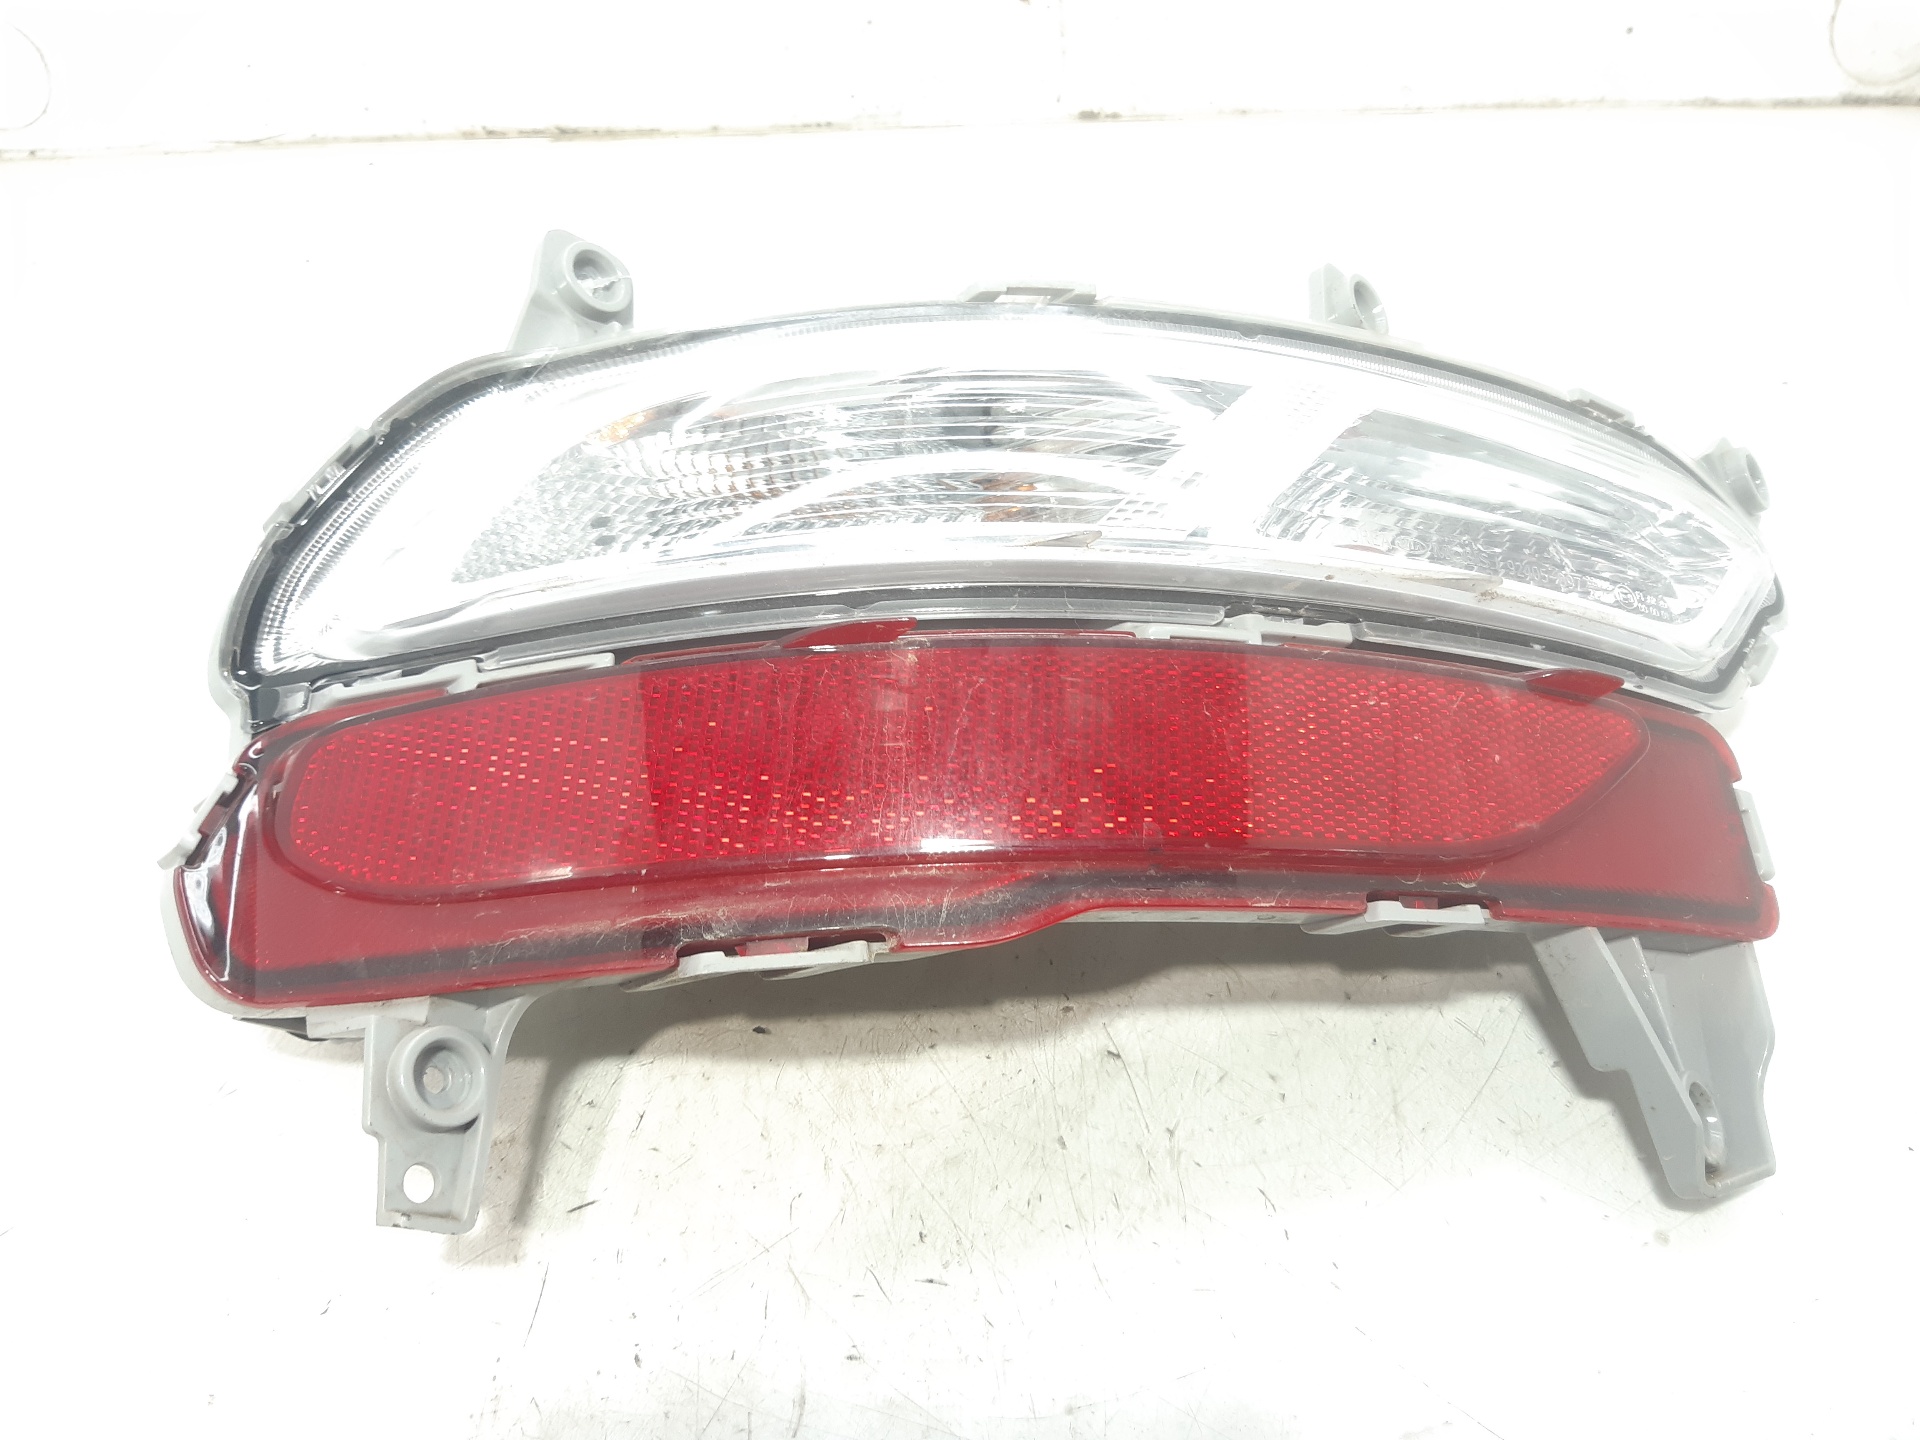 KIA Sportage 3 generation (2010-2015) Other parts of headlamps 92405D9710 24945238